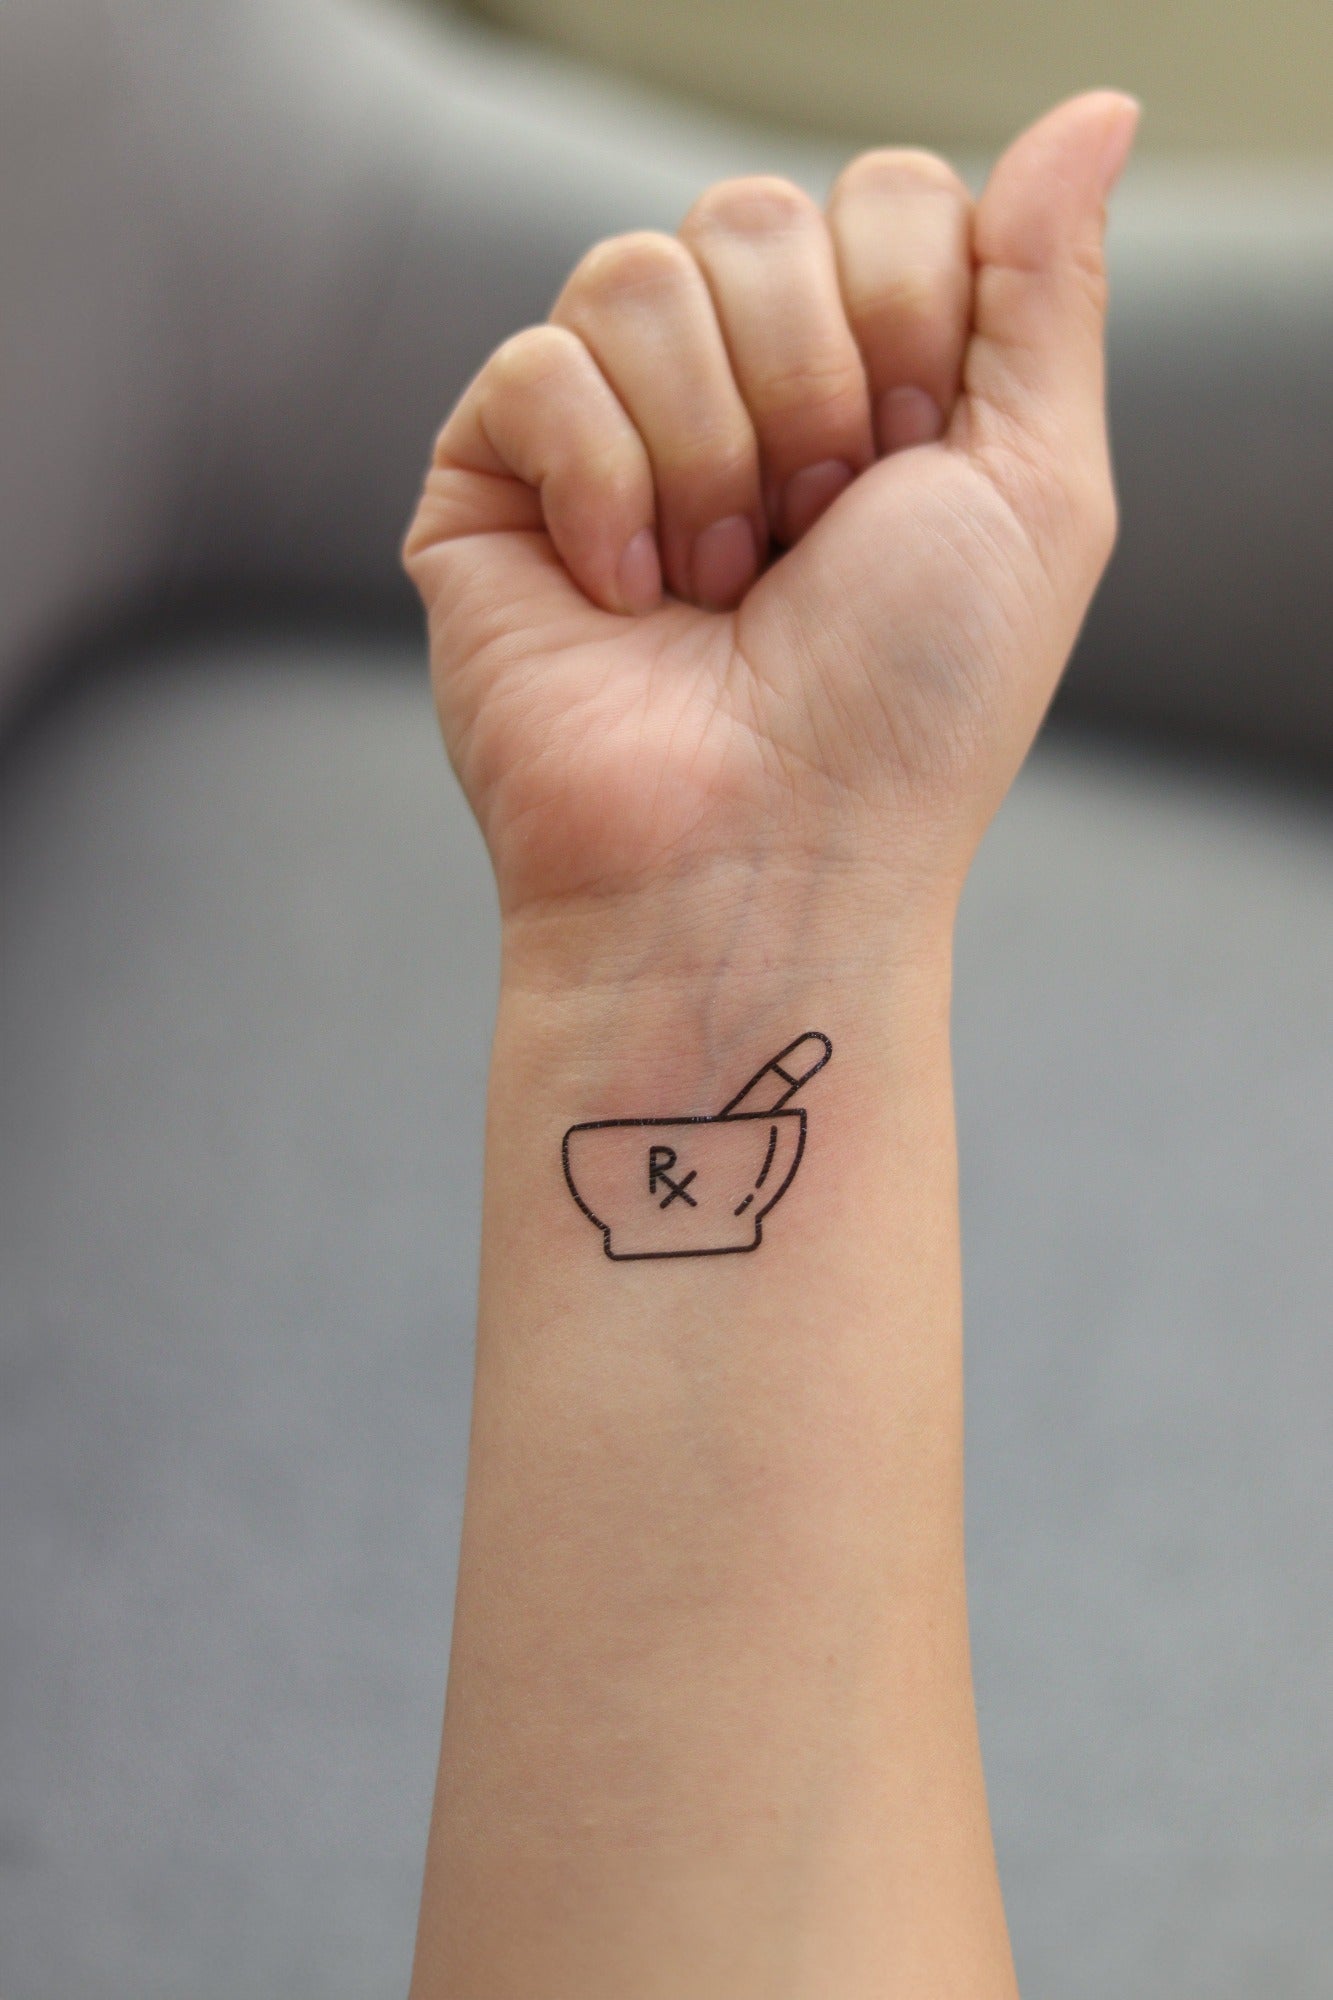 Easy Removable Medical Tattoos